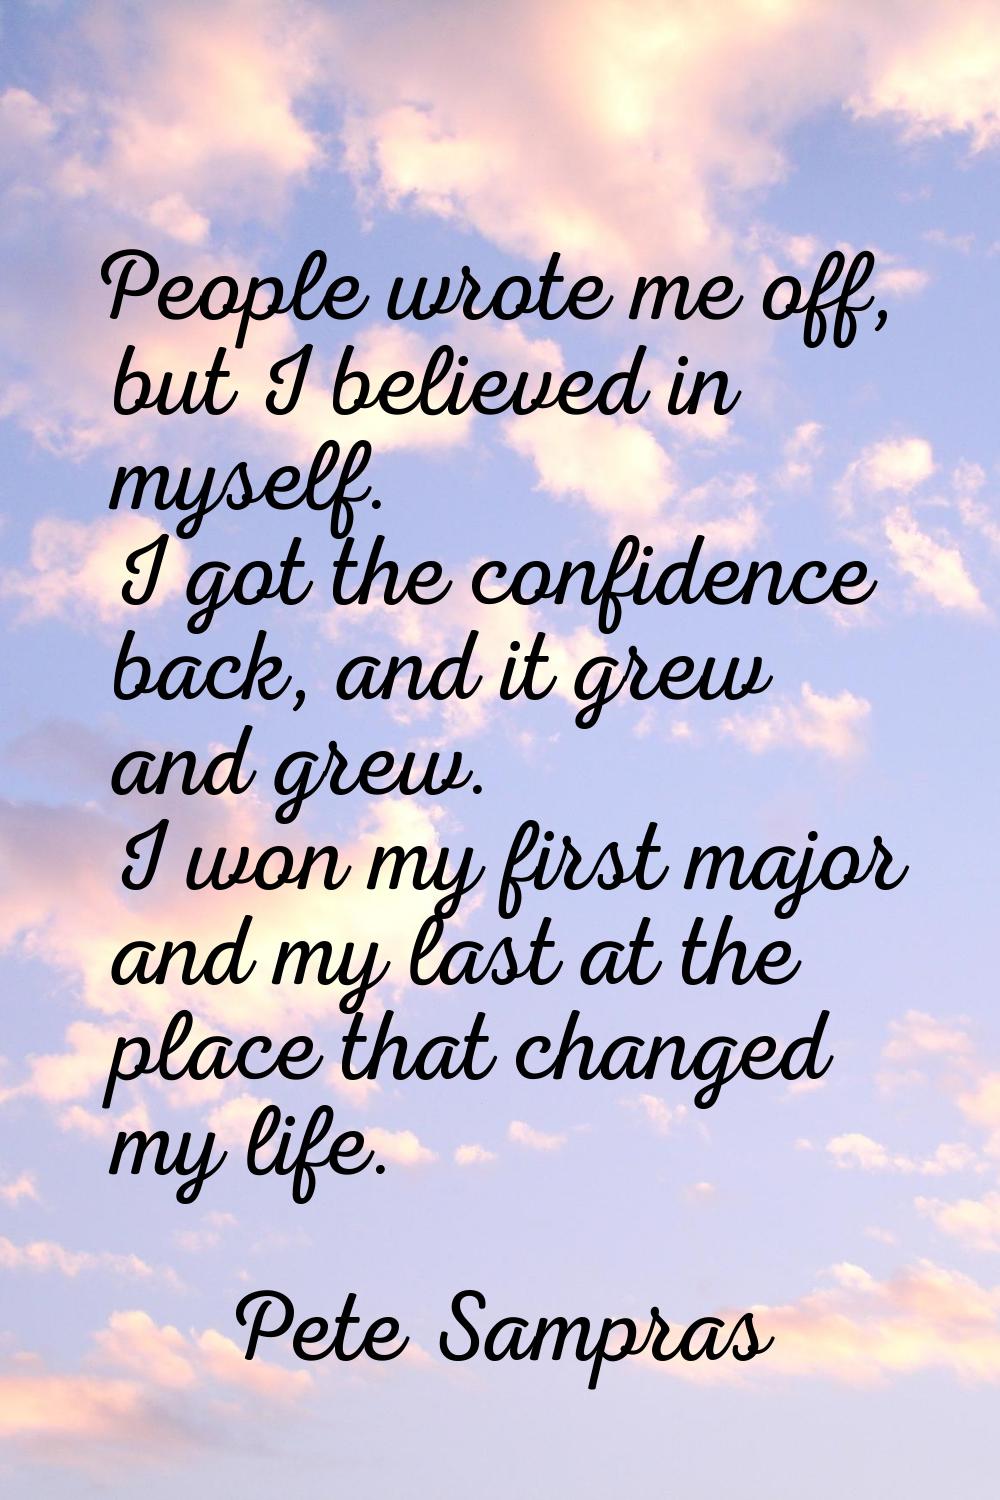 People wrote me off, but I believed in myself. I got the confidence back, and it grew and grew. I w